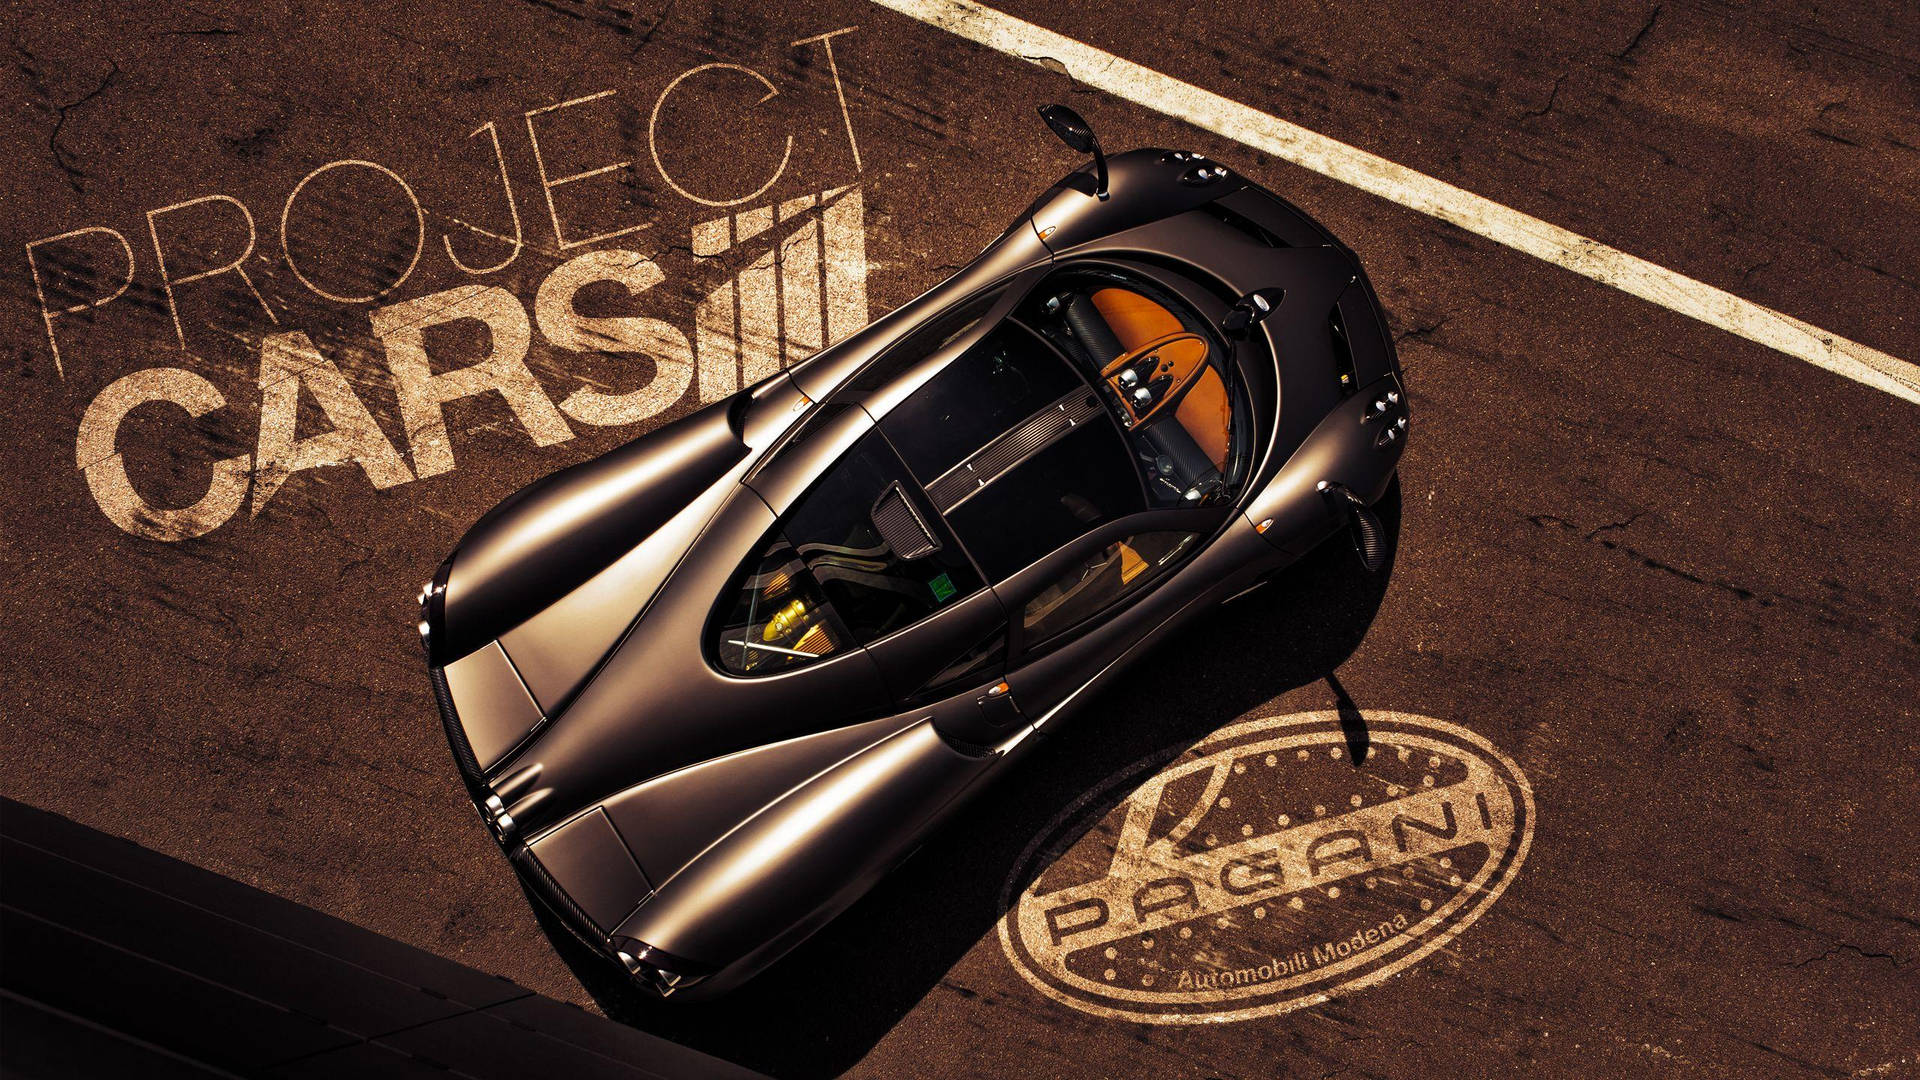 Pagani Huayra Aerial Shot From Project Cars Background